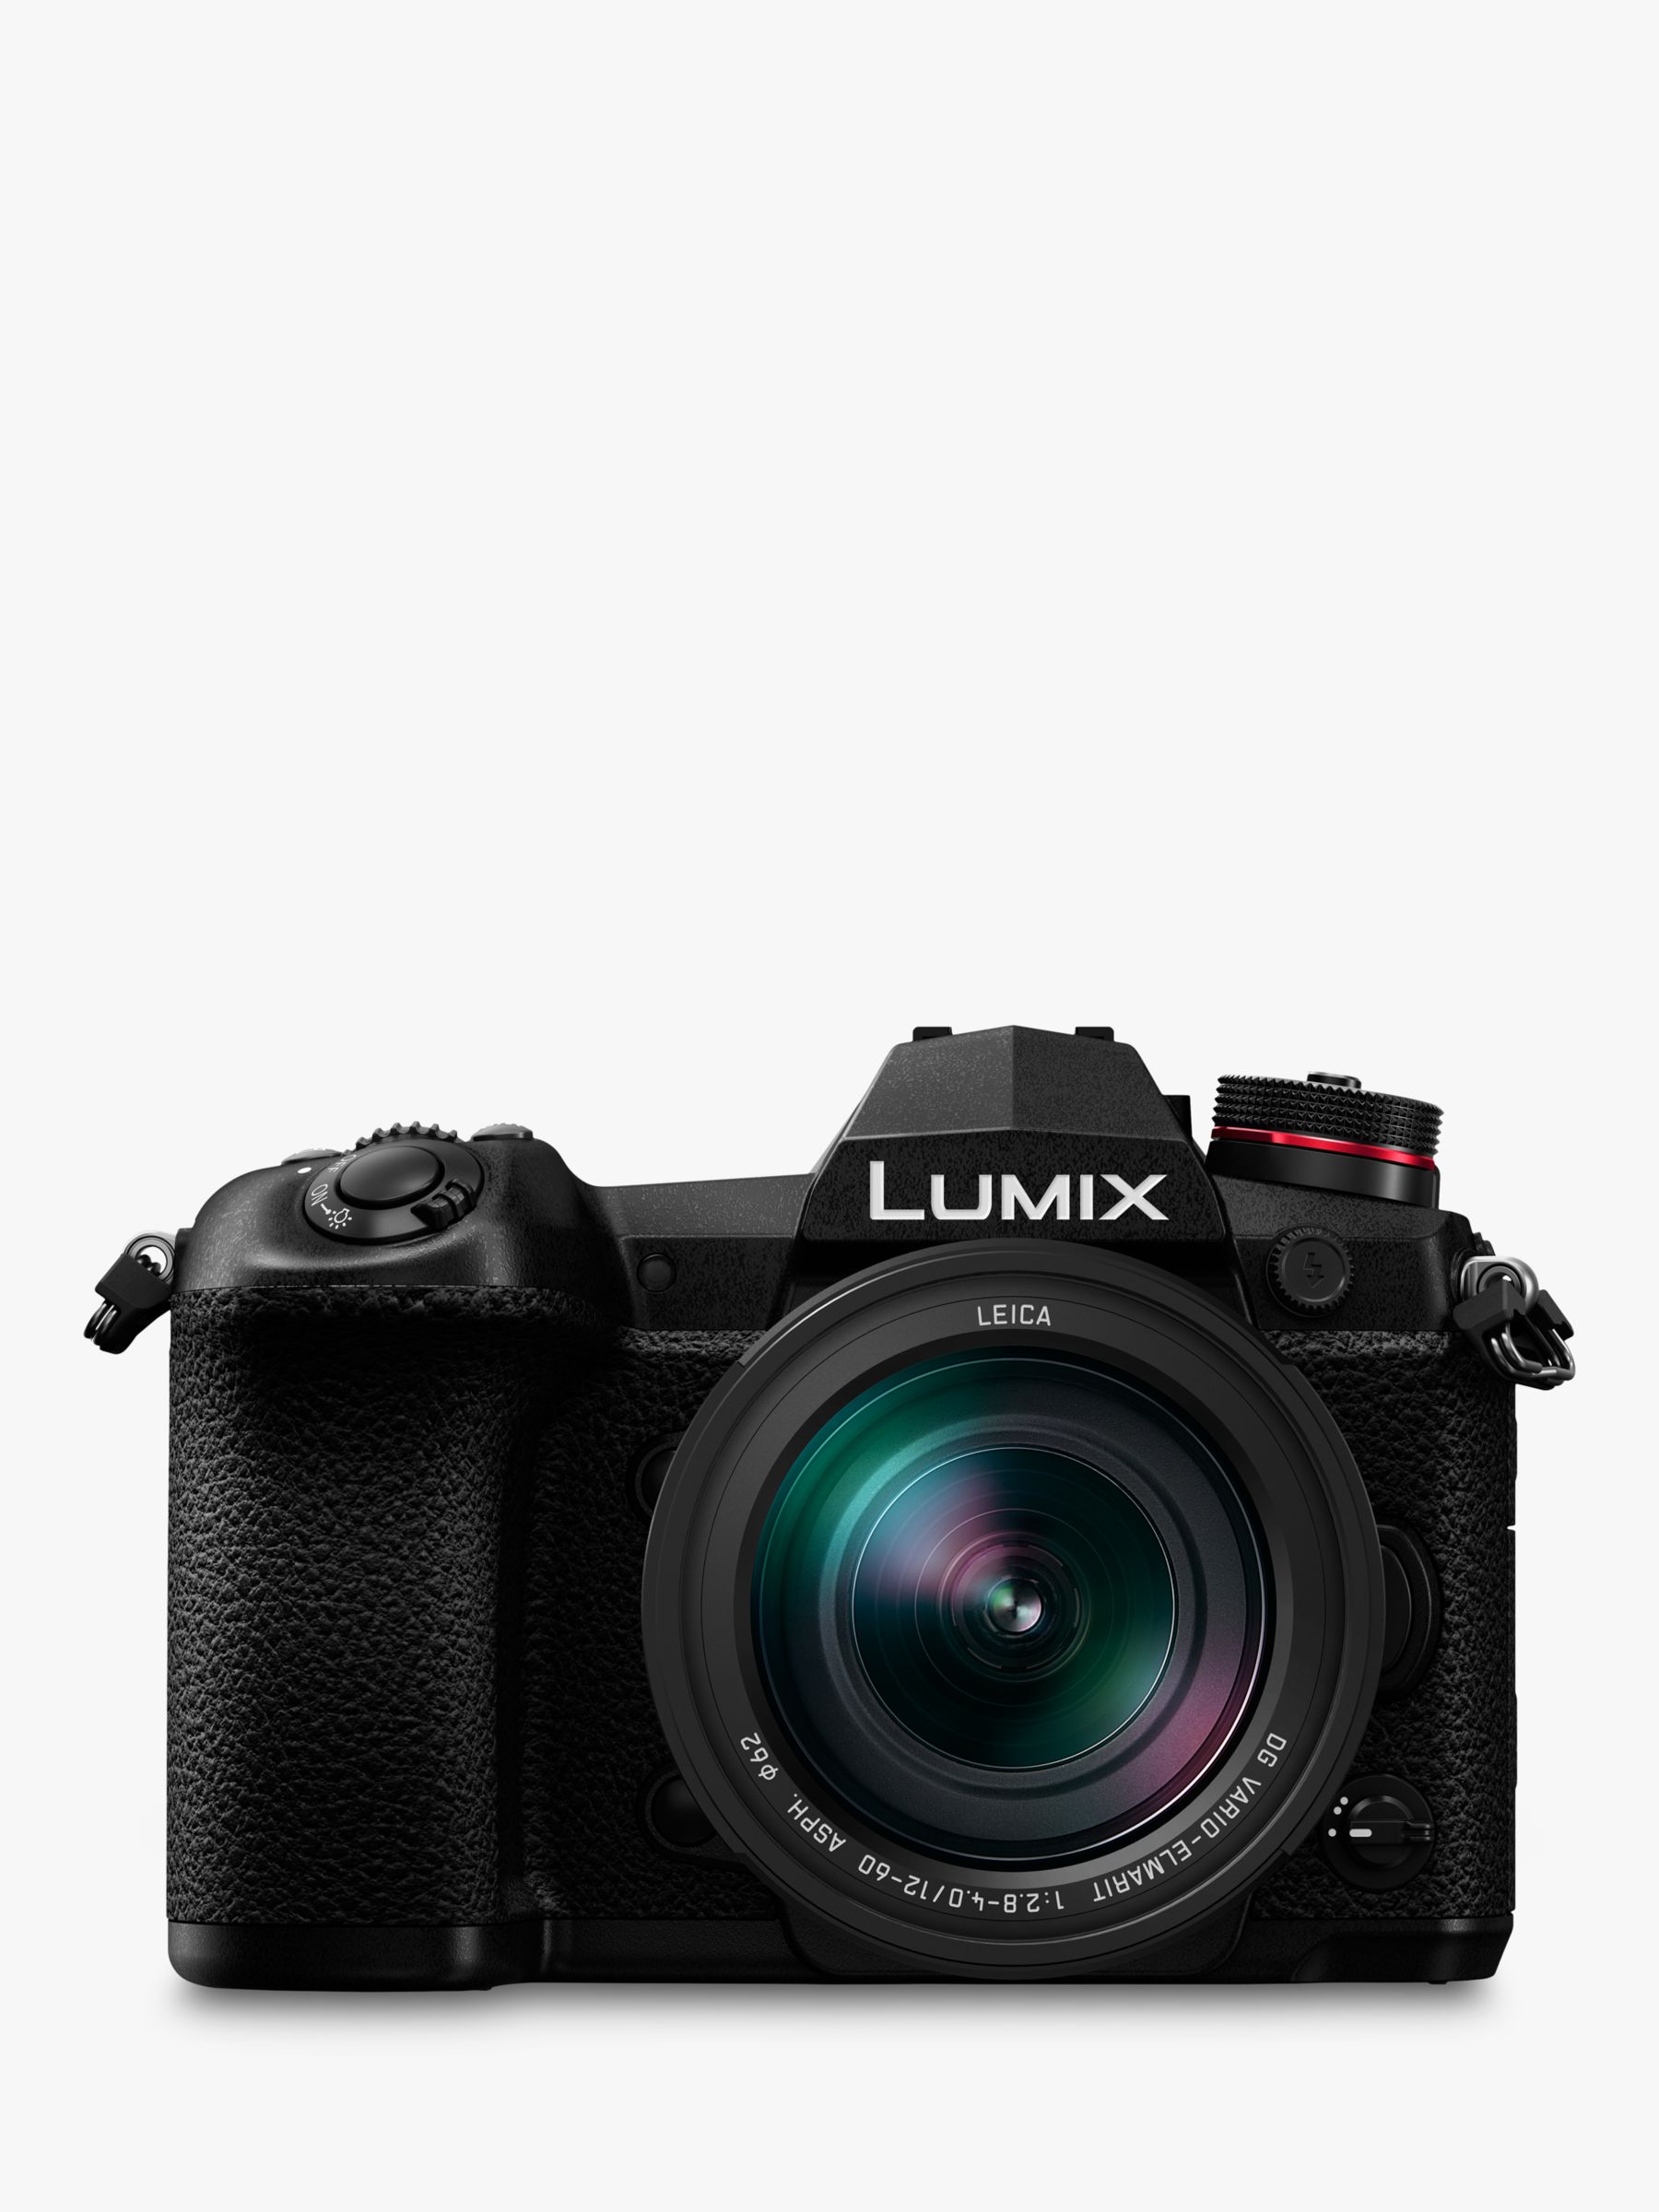 Panasonic Lumix DC-G9 Compact System Camera with Leica 12-60mm f2.8-4.0 Power O.I.S. Lens, 4K, 20.3MP, 4x Digital Zoom, Wi-Fi, OLED Viewfinder, 3 Vari-Angle Touch Screen, Black